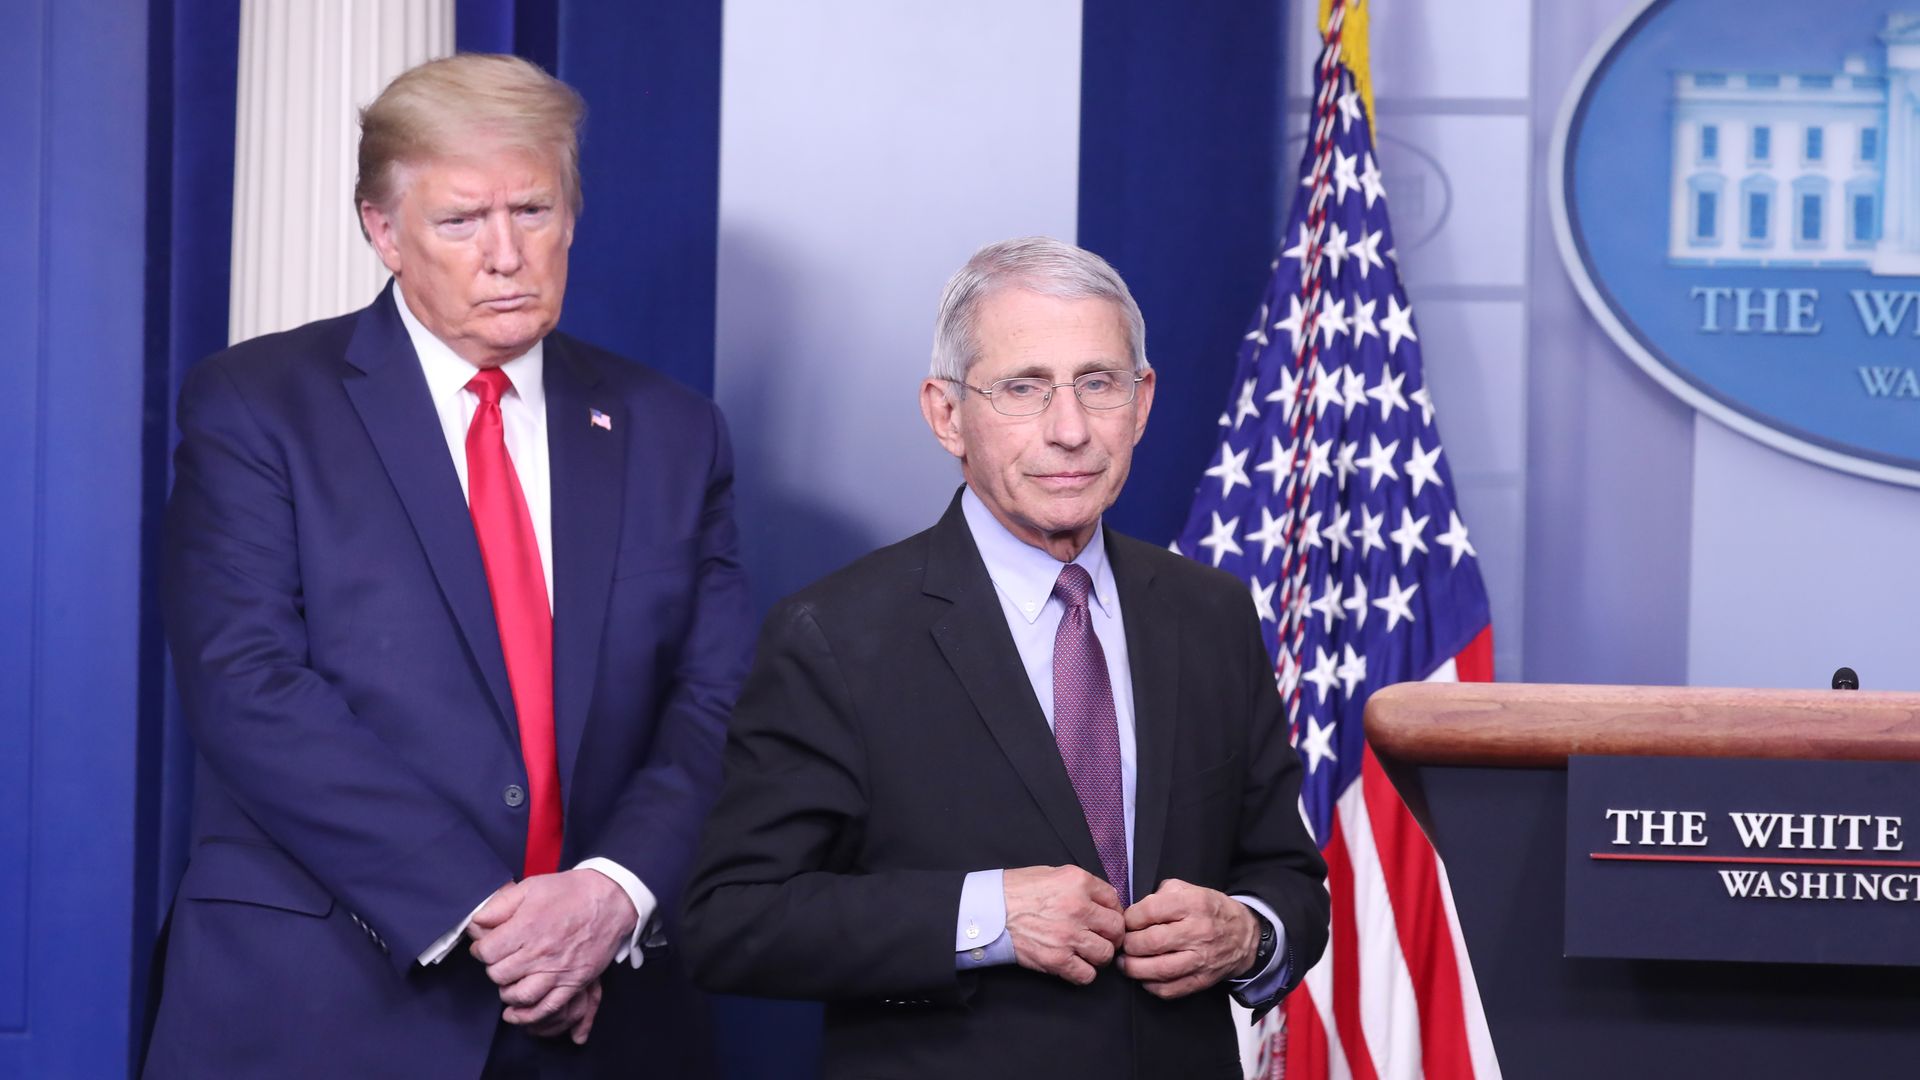 Trump and Fauci